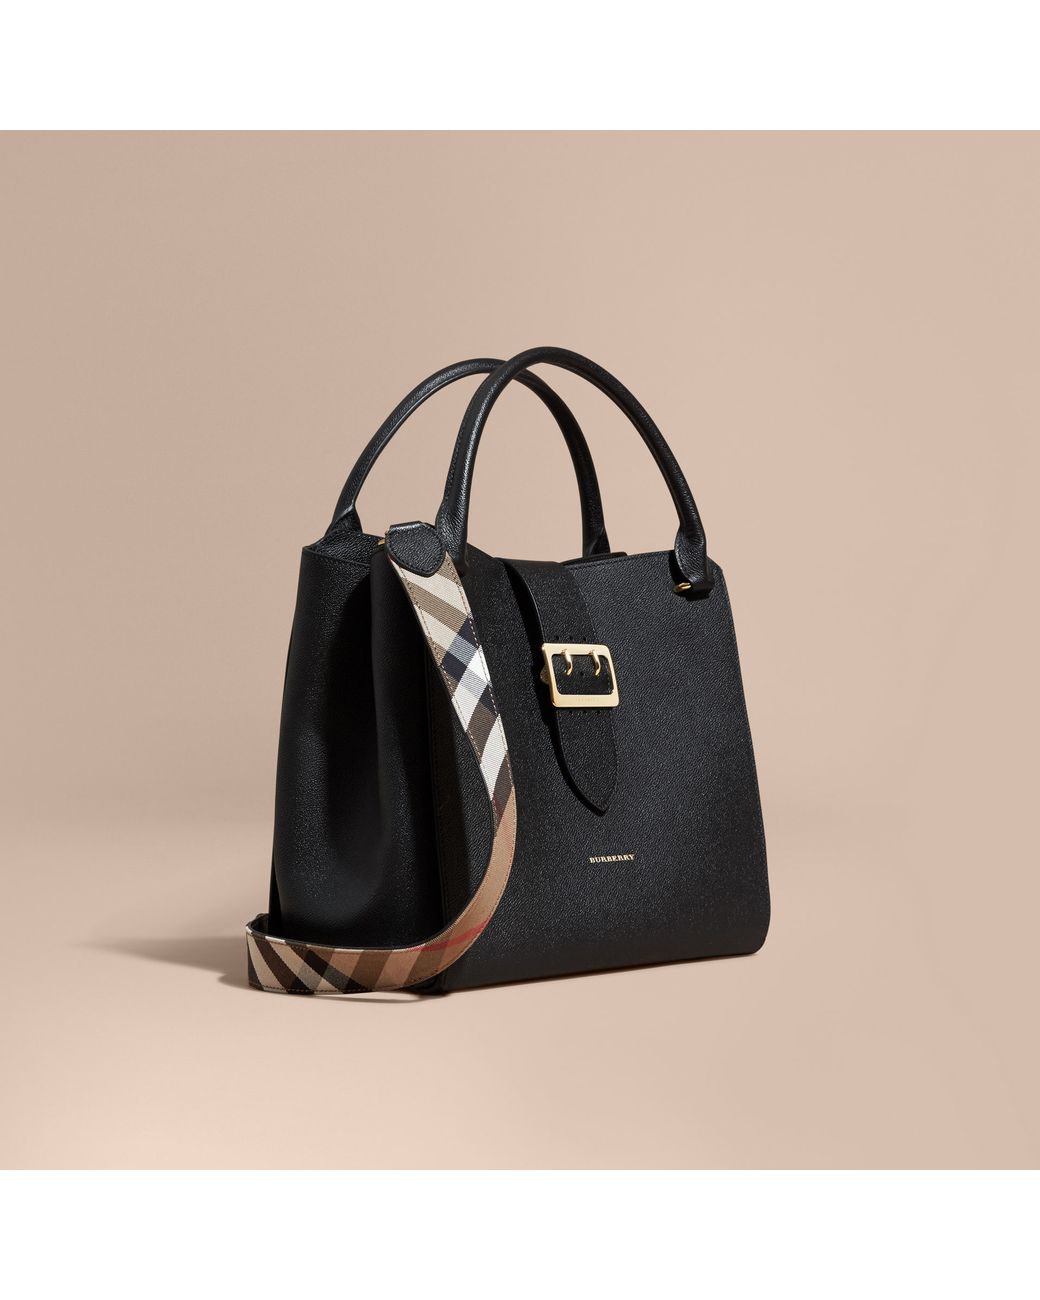 Burberry Canvas & Leather Tote- Like New! Price: $1,250 Item